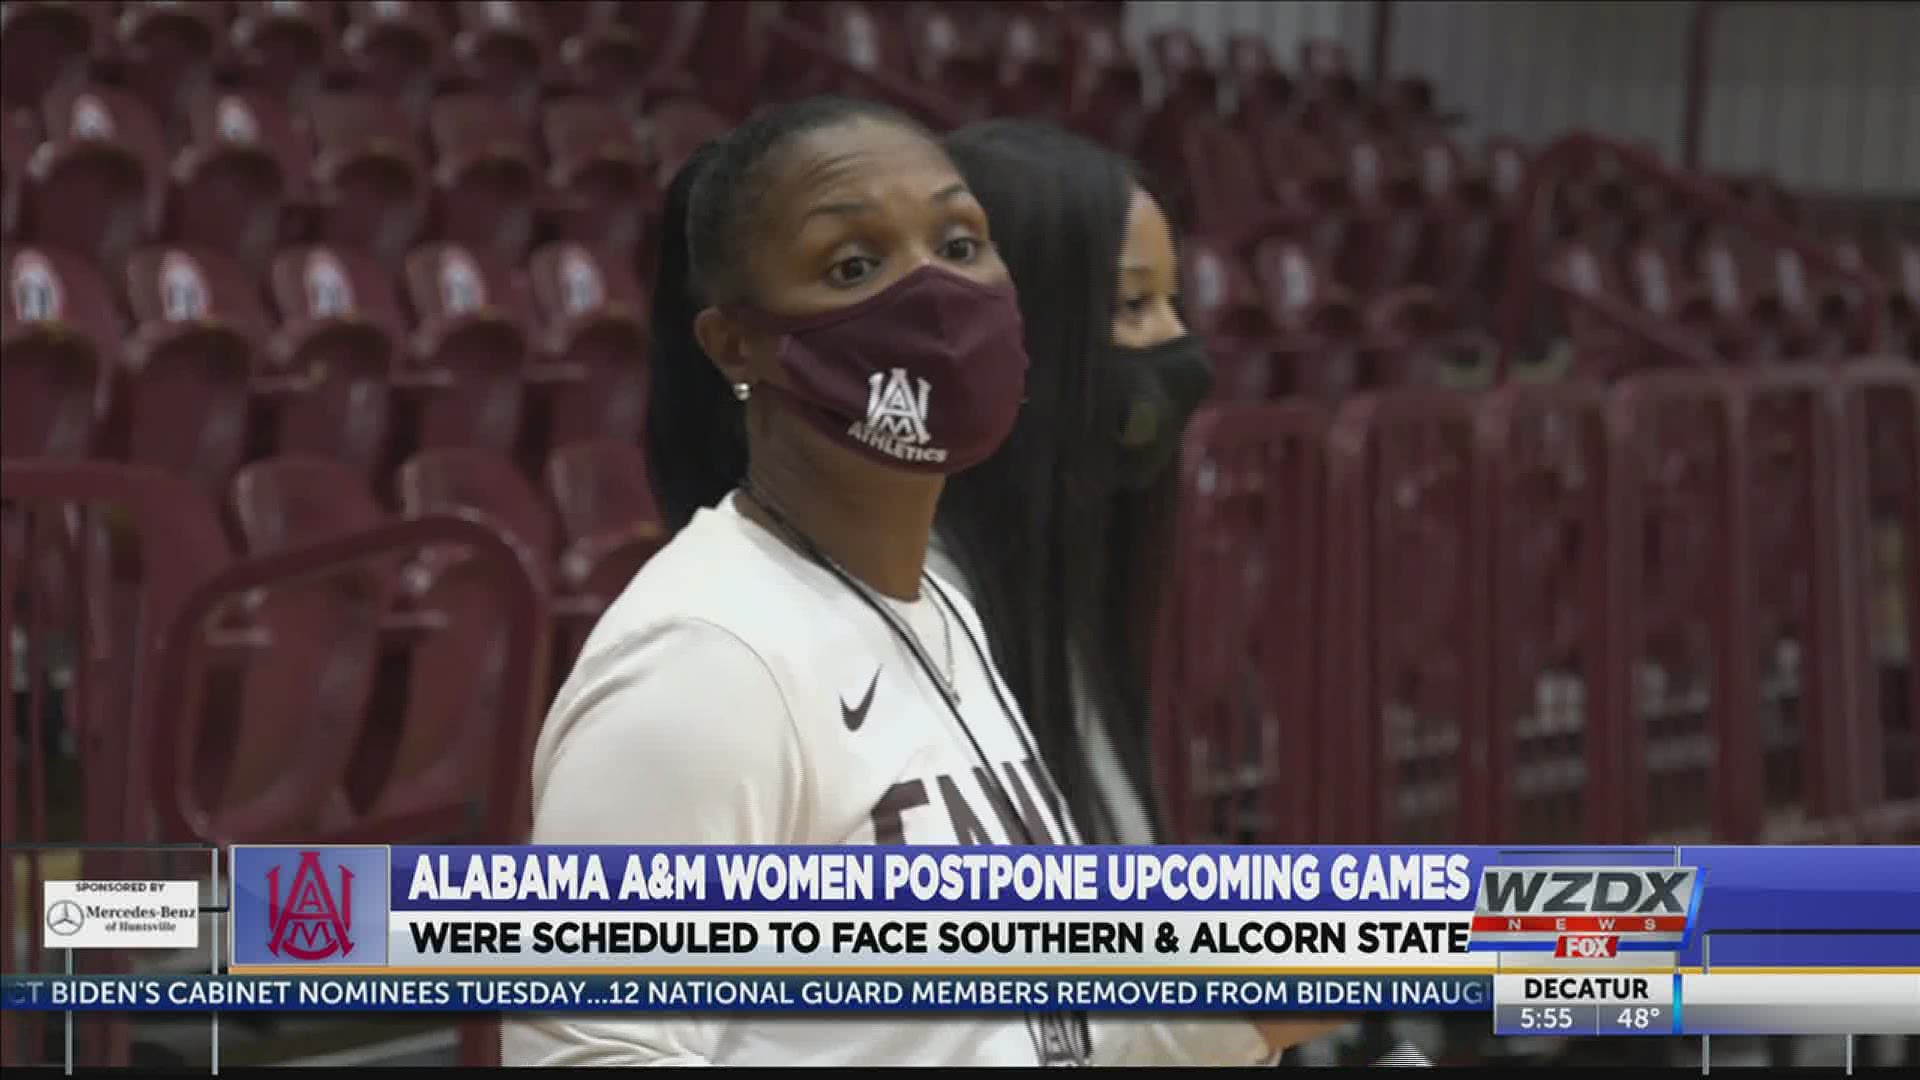 Alabama A&M's upcoming women's basketball games scheduled against Southern and Alcorn State have been postponed as a result of ongoing COVID-19 protocols